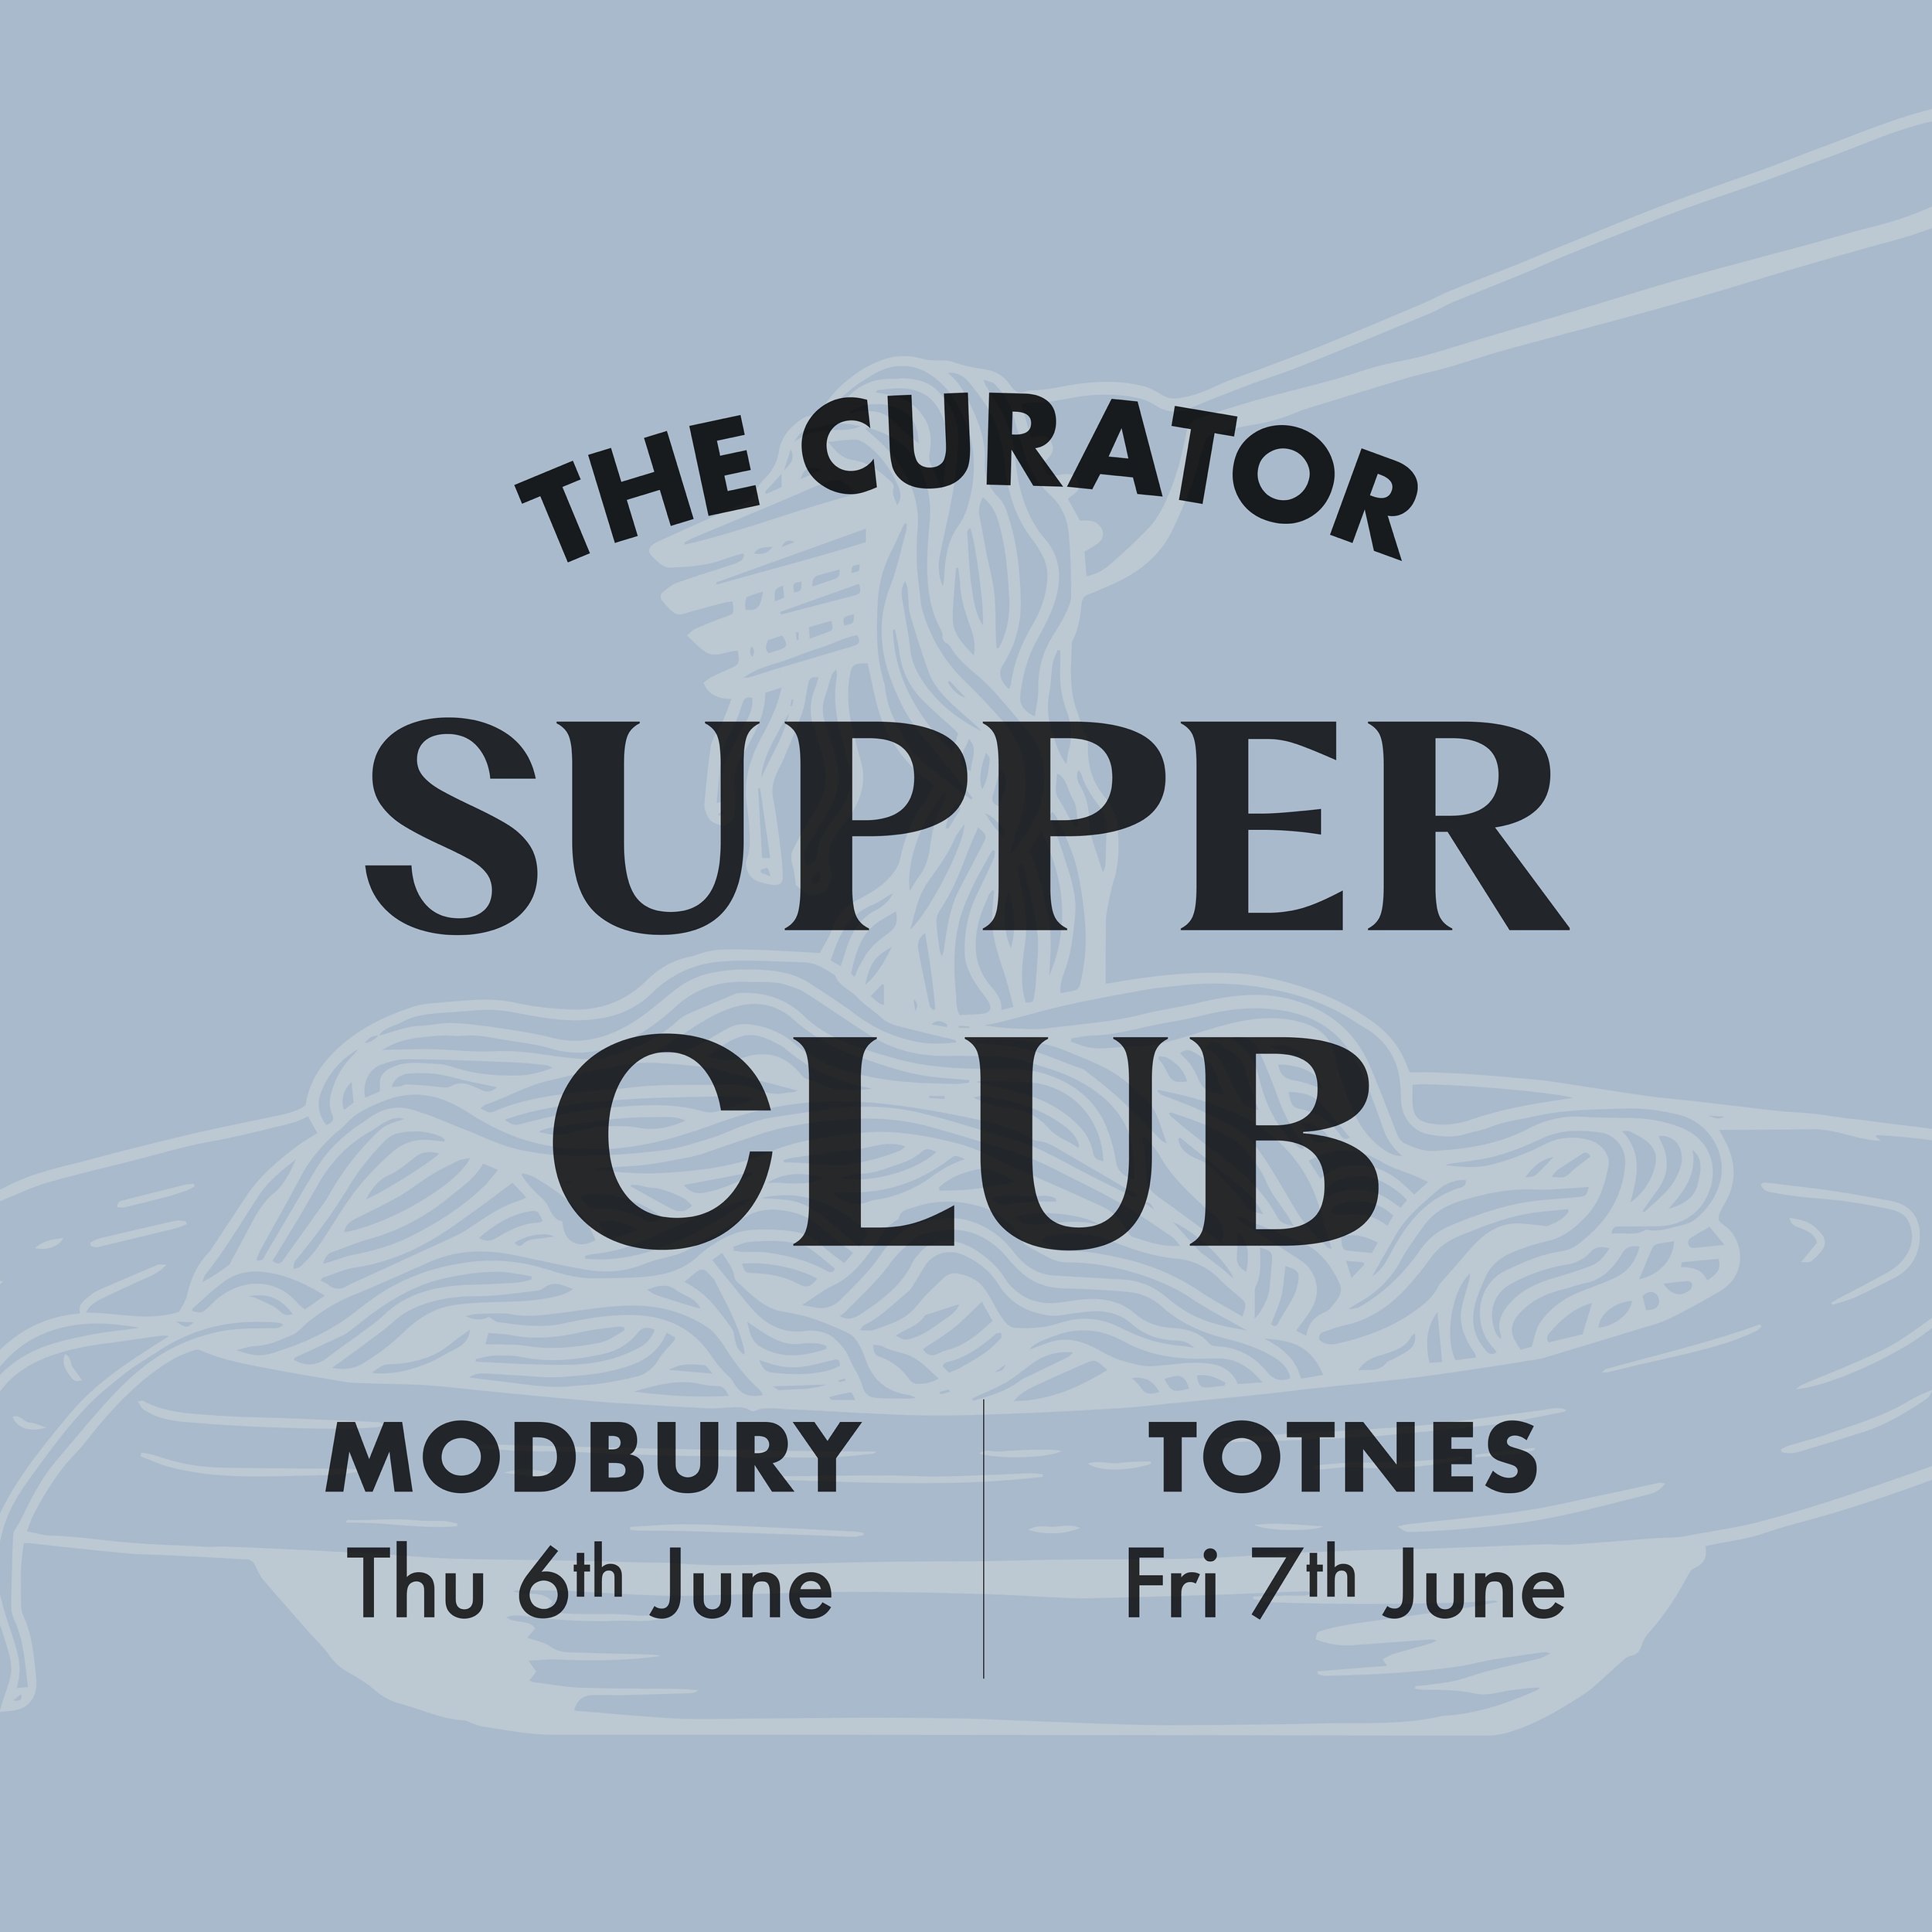 Supper Club - June Edition

Tickets are now available for our next Supper Club in June, link in bio 🎟️

&mdash;&mdash;

New to our Supper Club? We host these special nights once a month (except May &amp; August this year), with two sittings each eve